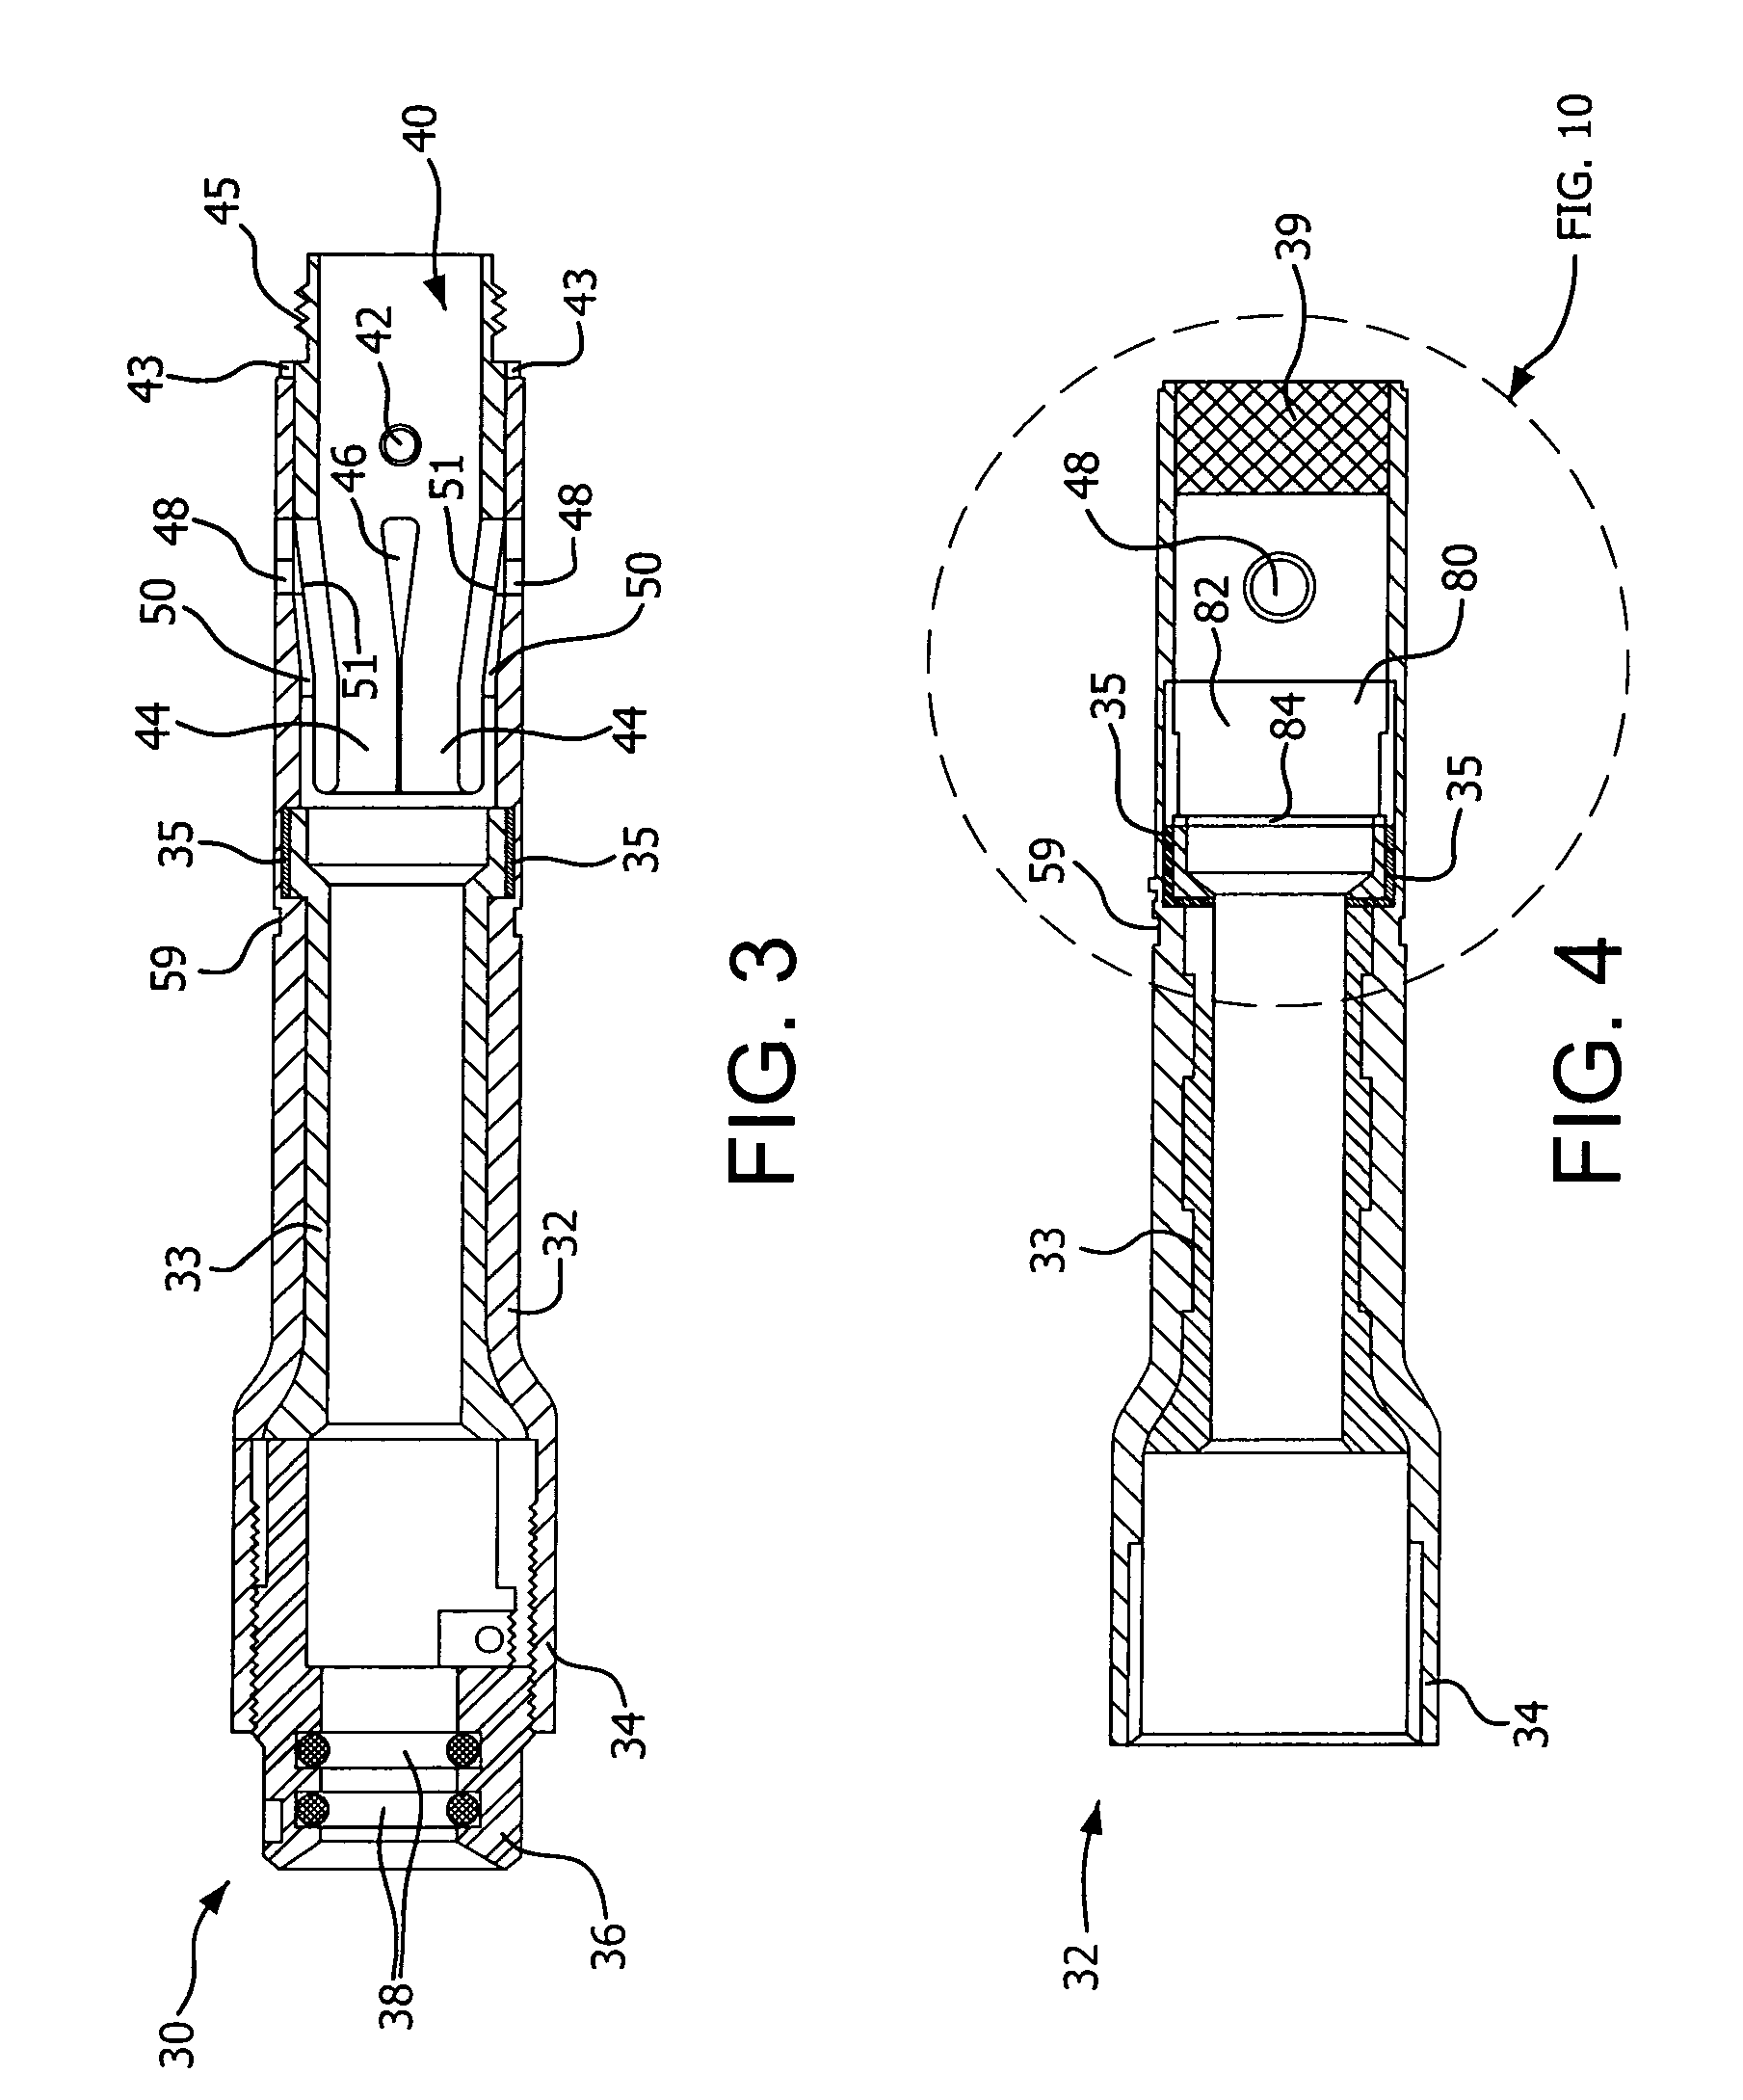 Electrical connector with arc shield, piston-contact positioner and electric stress graded interface